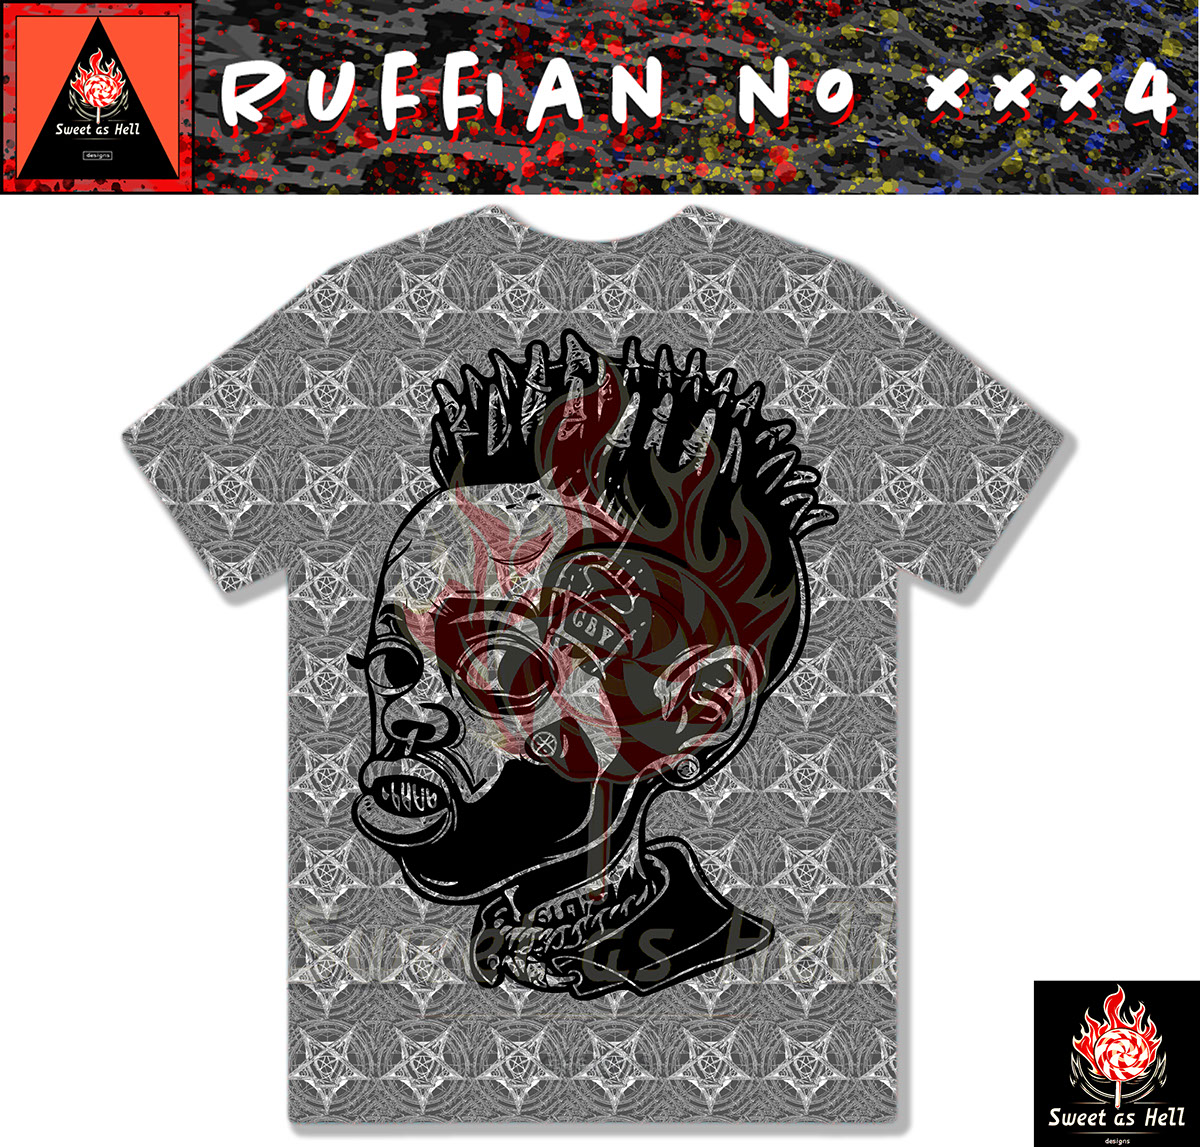 Sweet_As_Hell_Designs_Licensable_Ruffian_no_4 rendition image